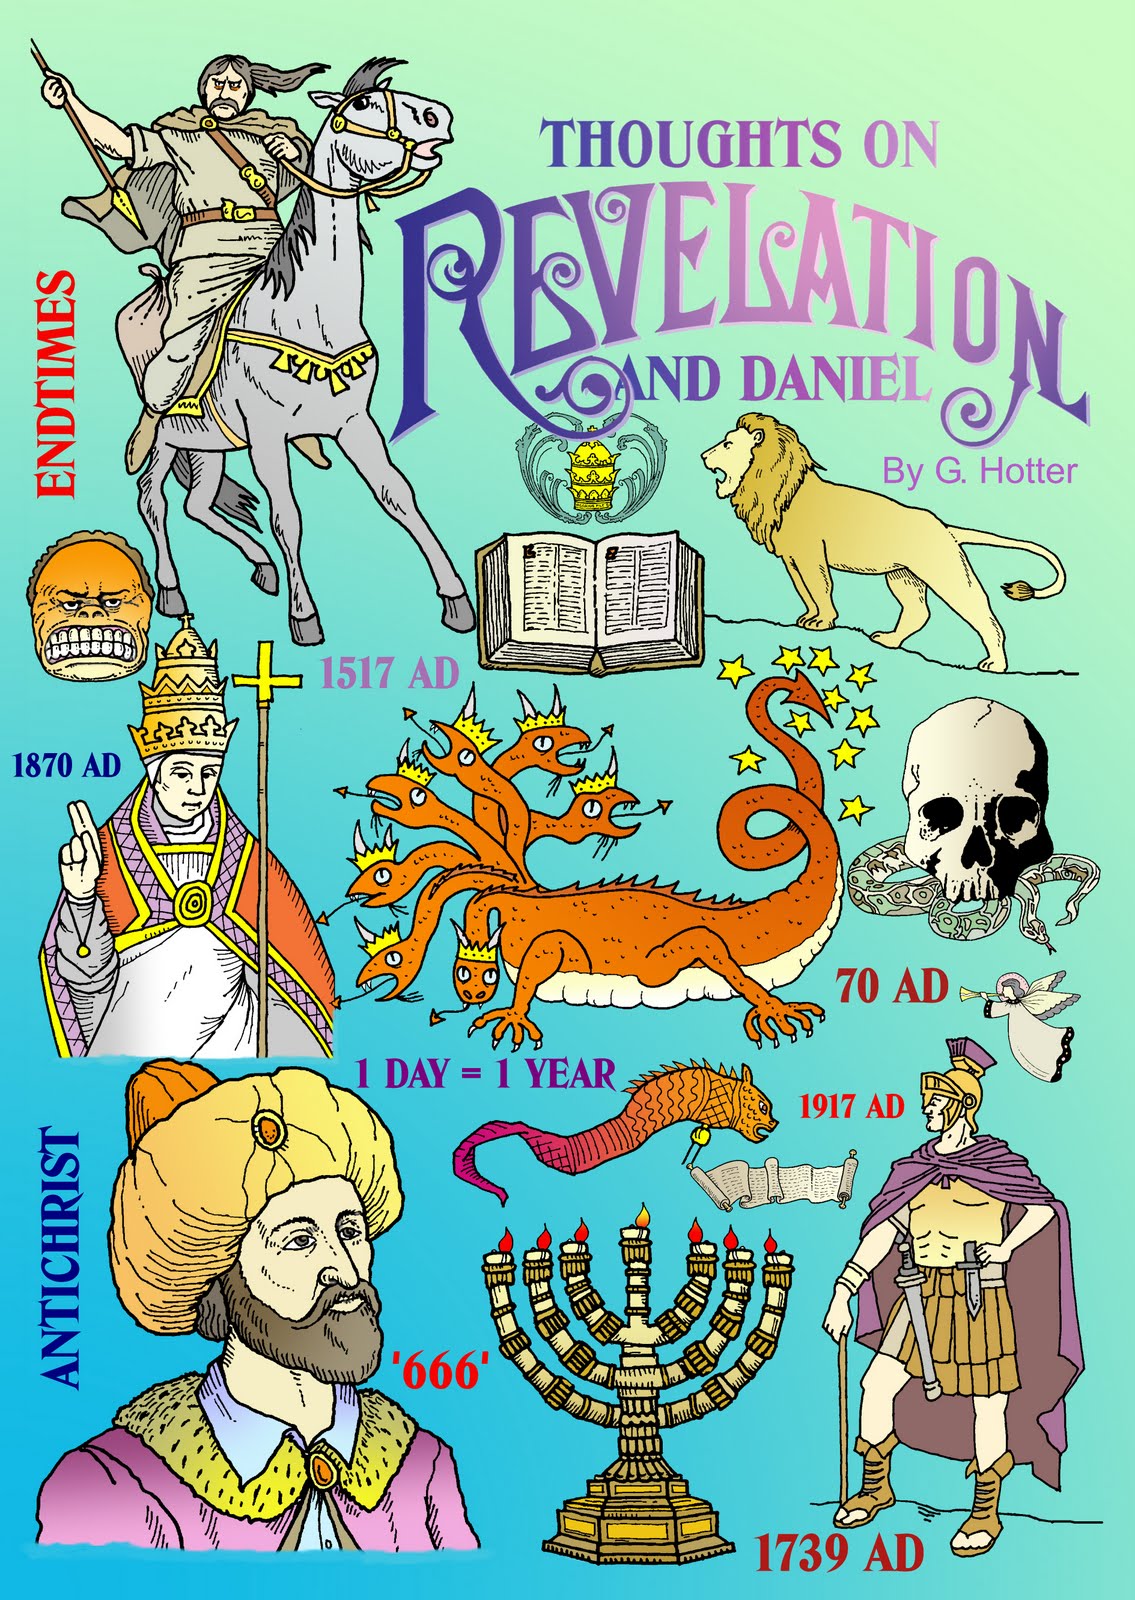 book of revelation clipart - photo #8